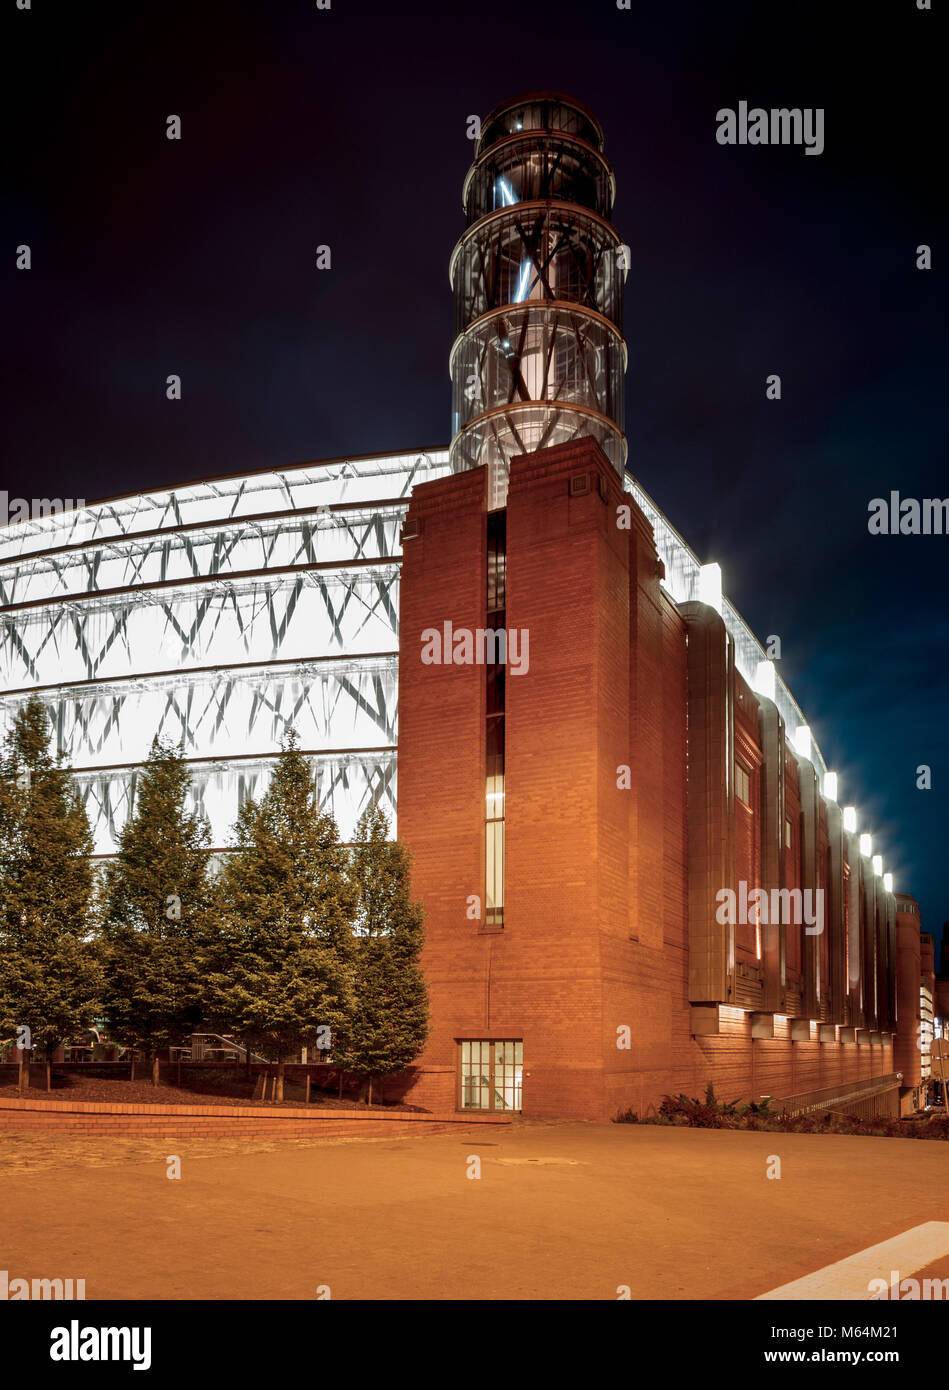 Stary browar (old brewery) shopping mall in Poznan city, Poland Stock Photo